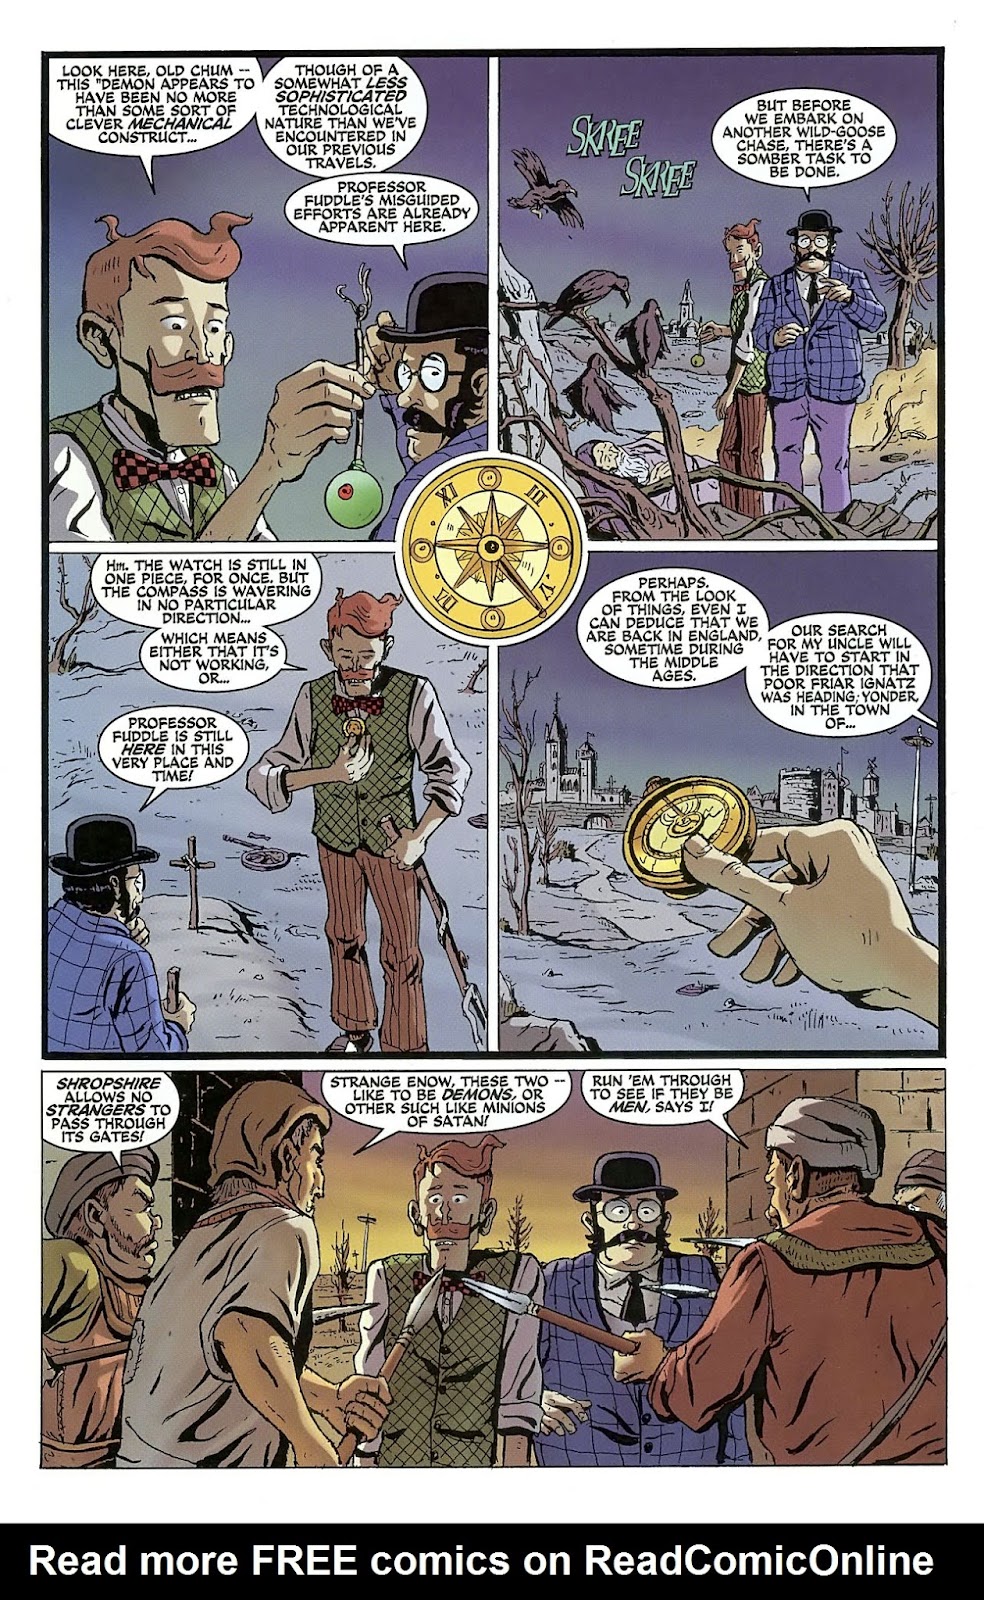 The Remarkable Worlds of Professor Phineas B. Fuddle issue 4 - Page 5